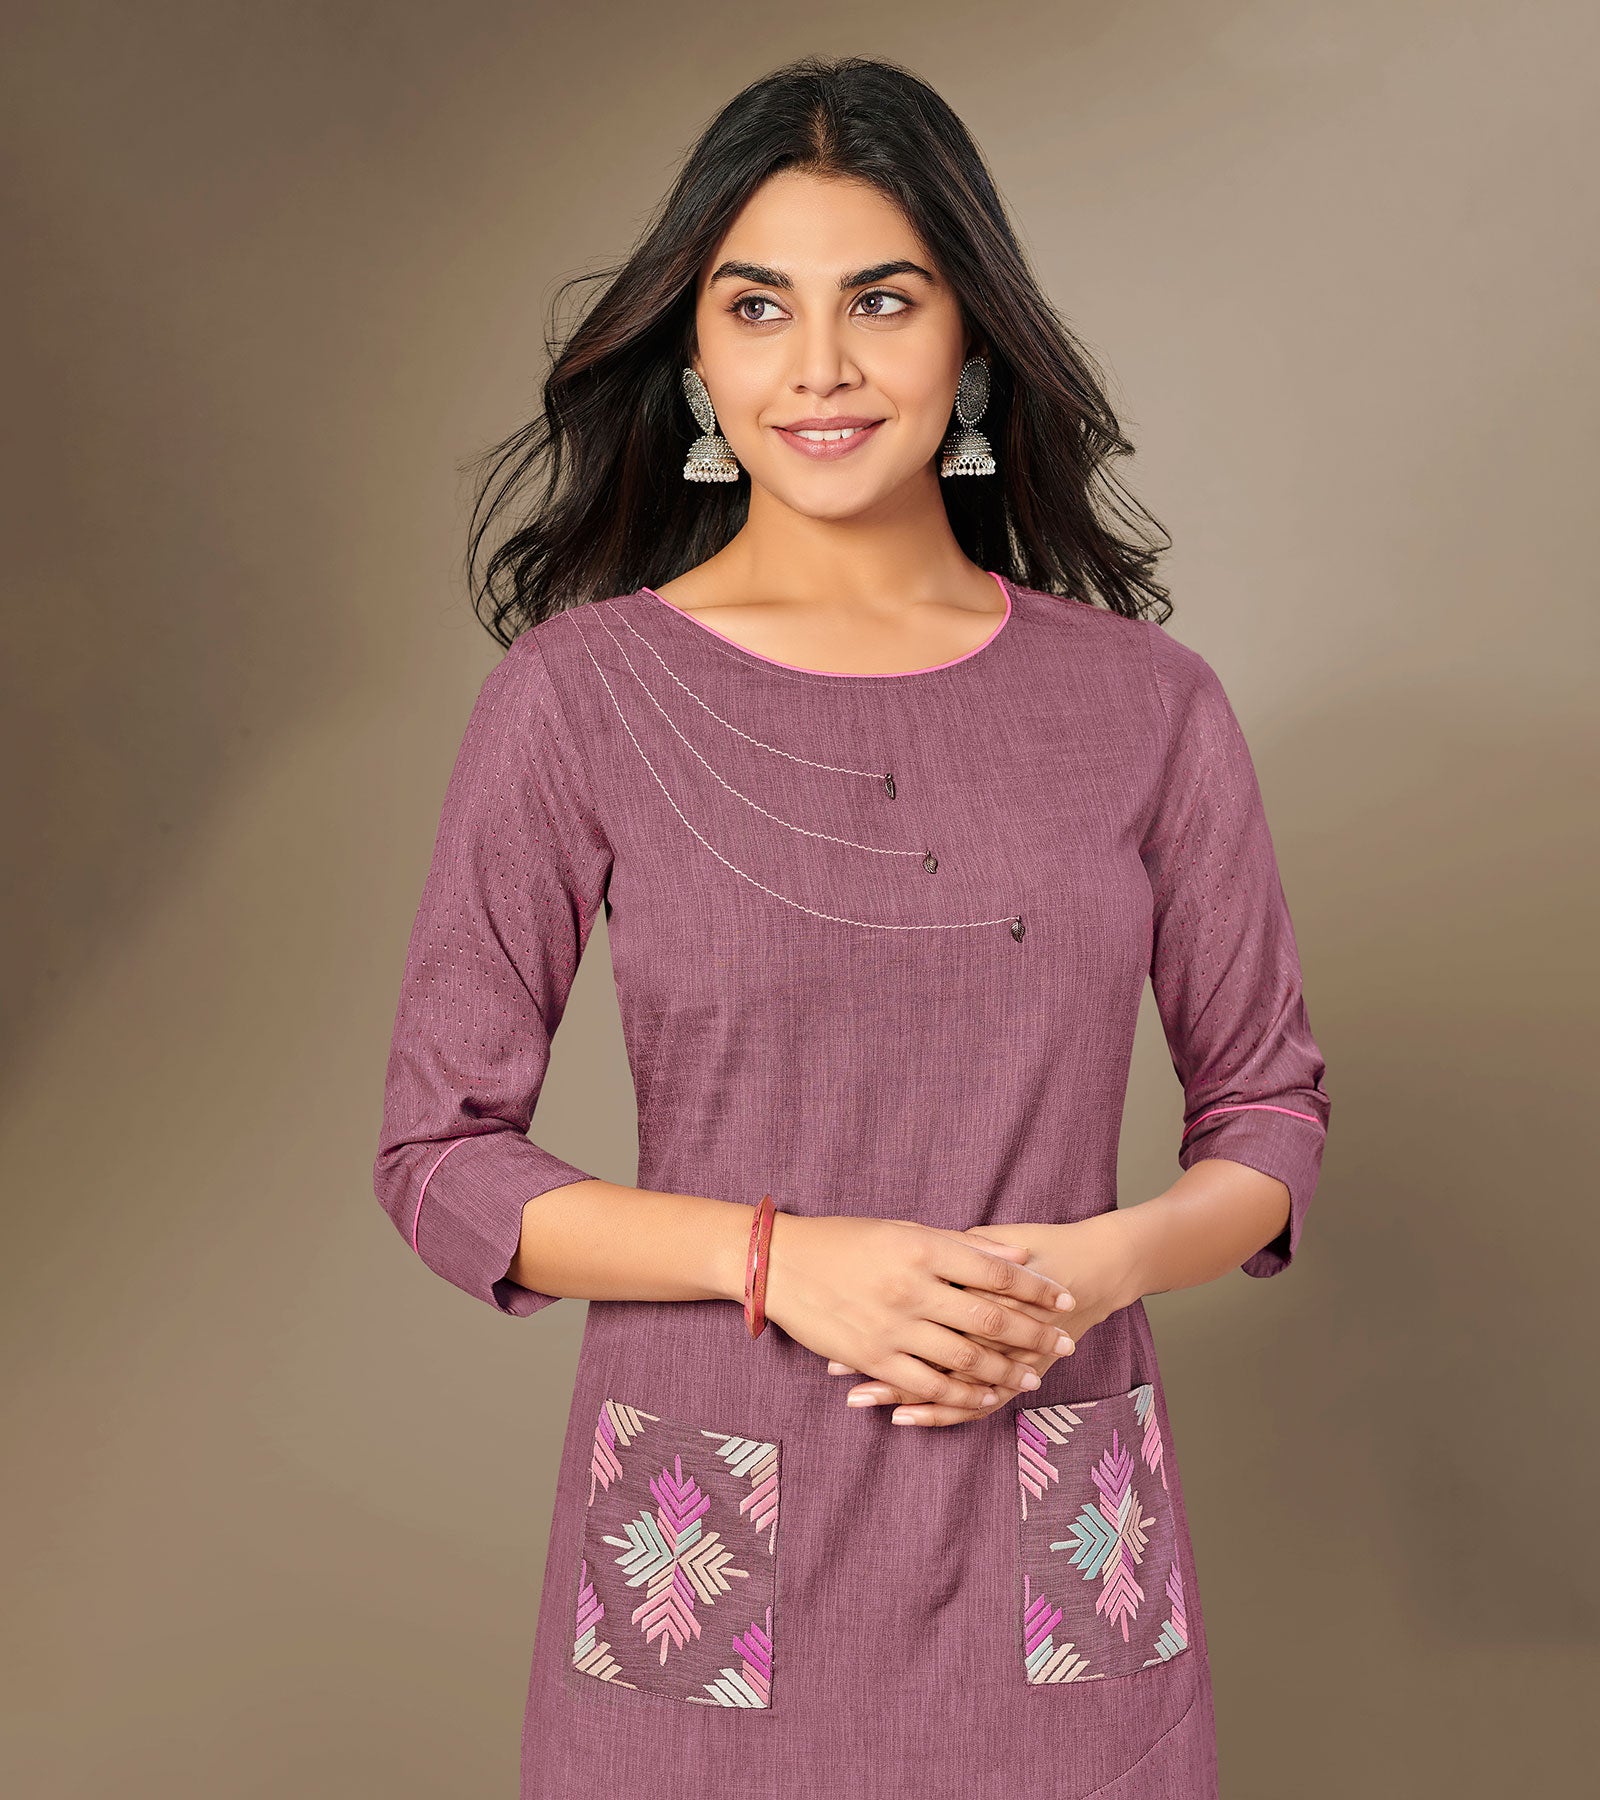 Top more than 203 kurti for 8 year girl best